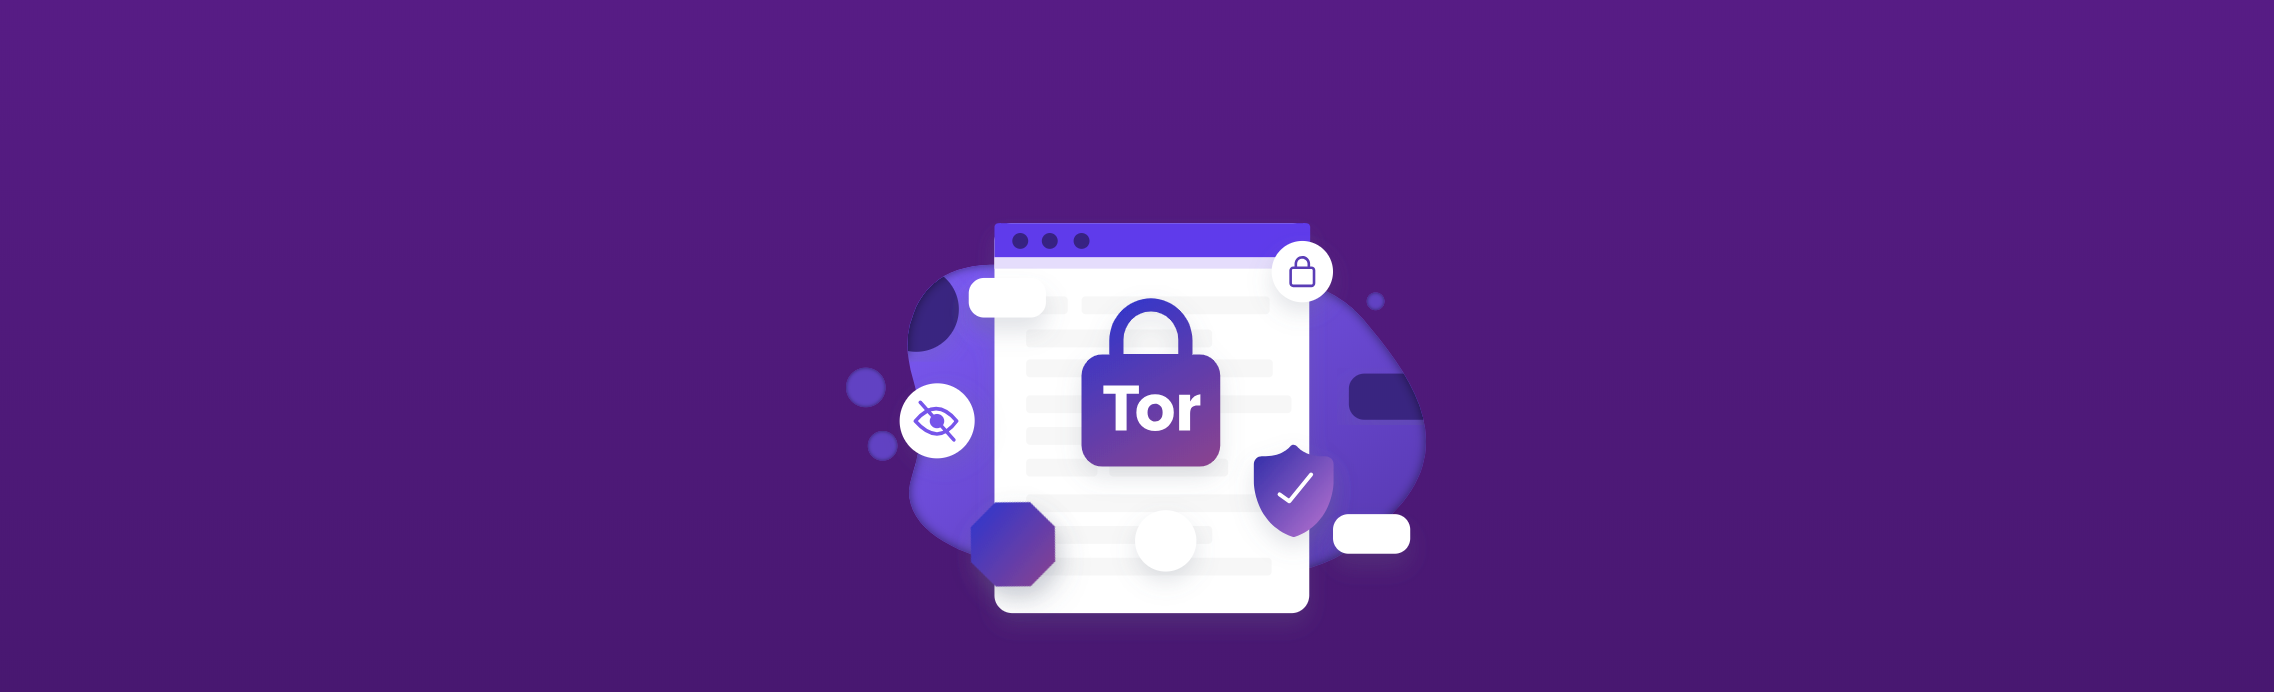 How to Anonymously Access Content on the Internet with Tor 9